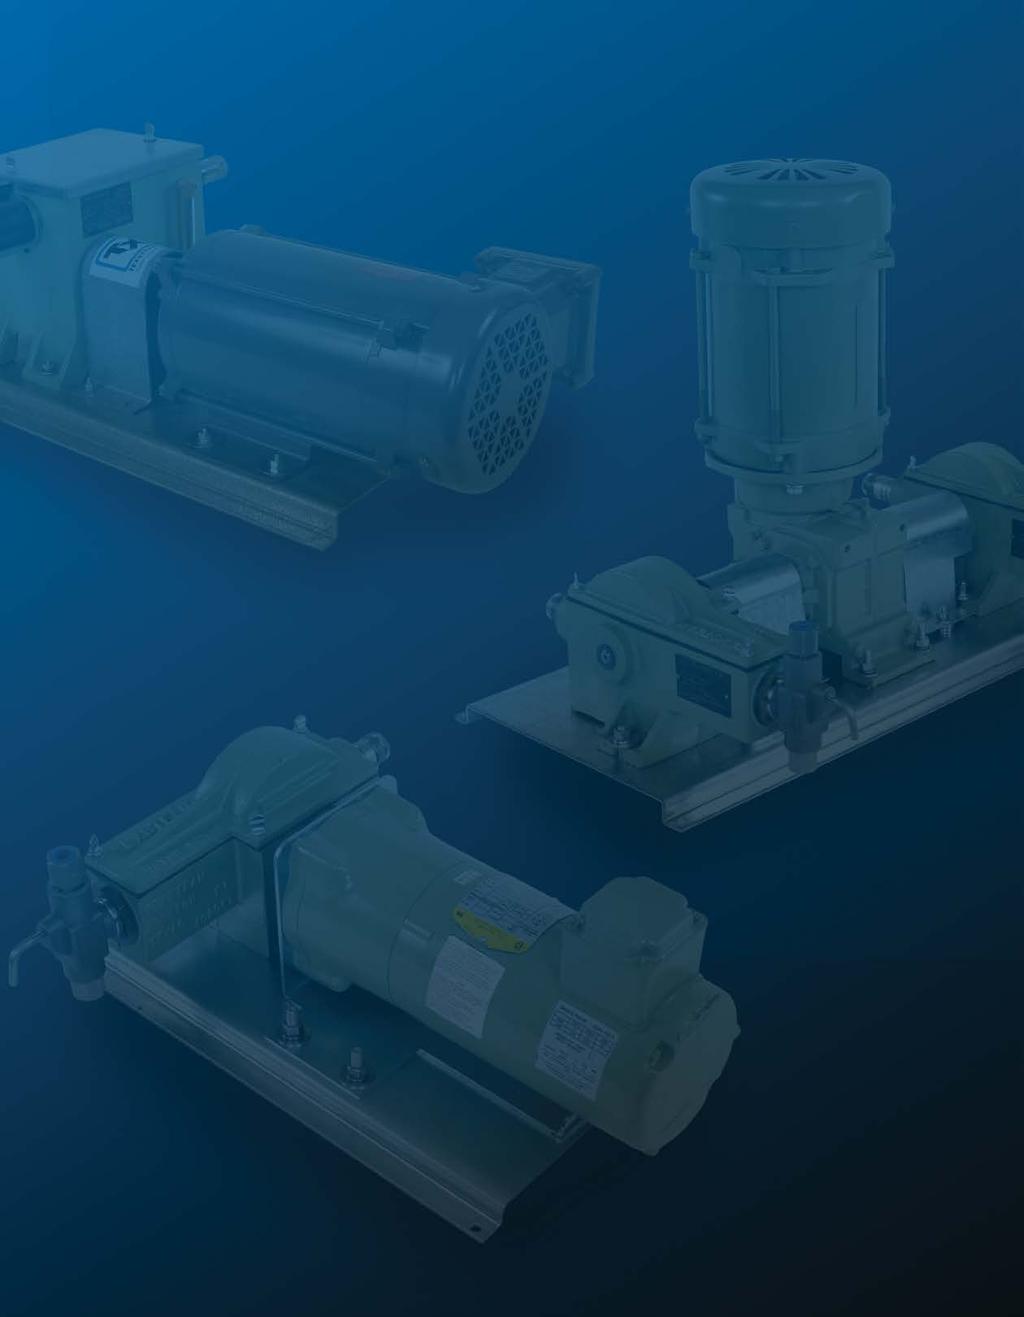 2 With a wide range of capacities and operating pressures, Dresser Natural Gas Solutions versatile Texsteam pumps can handle challenging